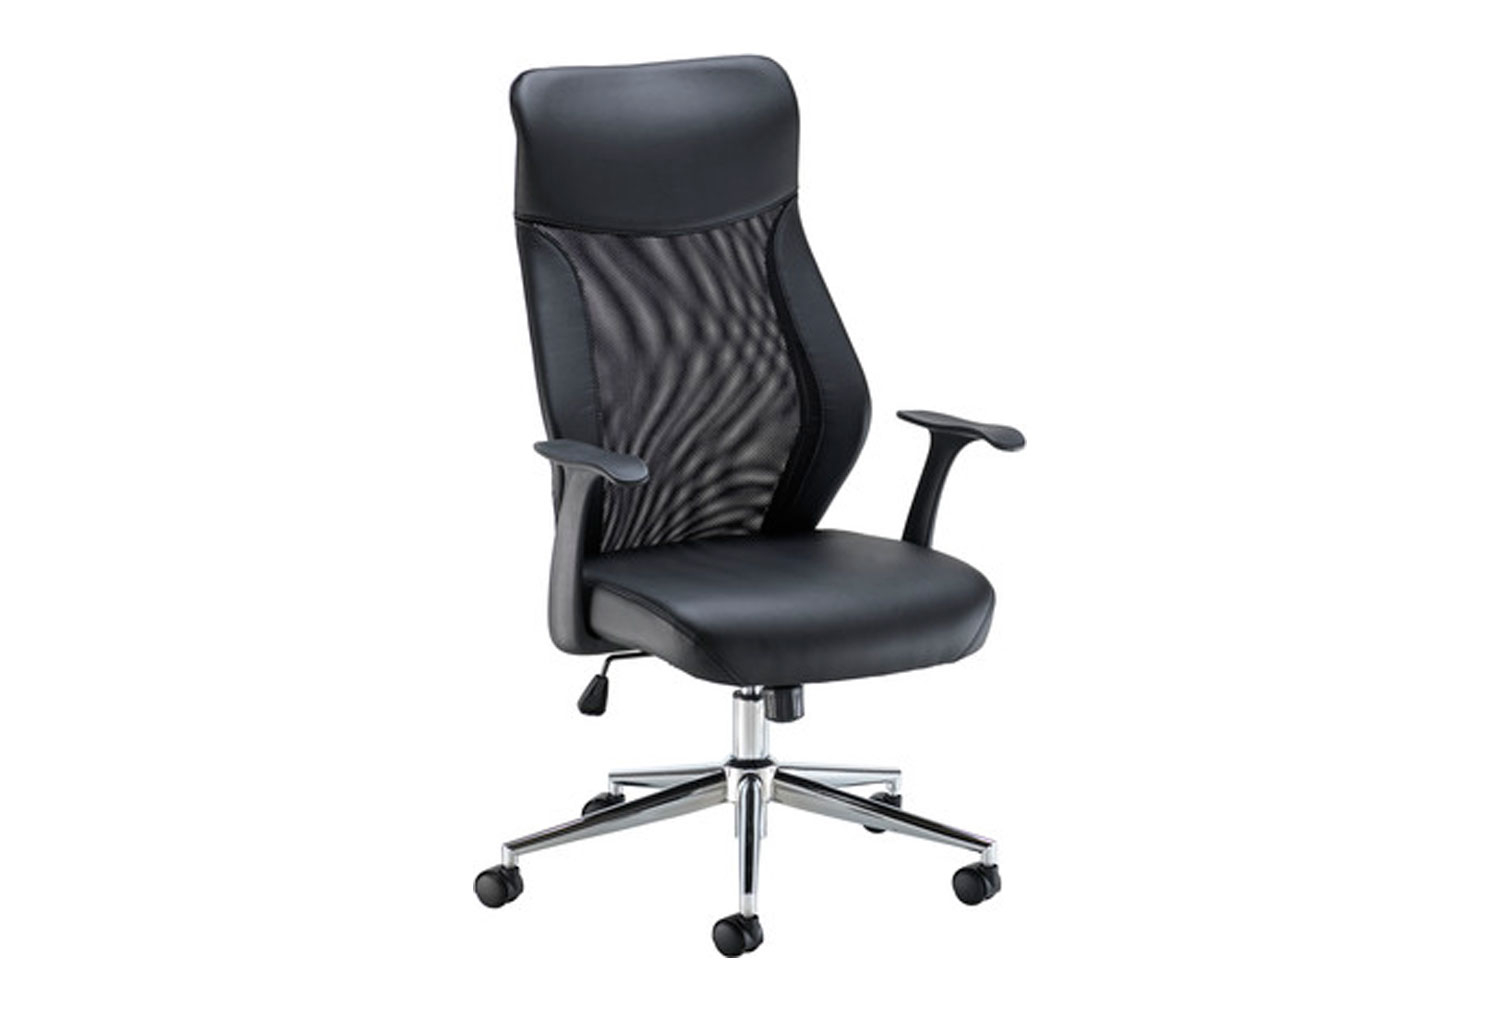 Verson High Back Executive Office Chair, Black, Fully Installed